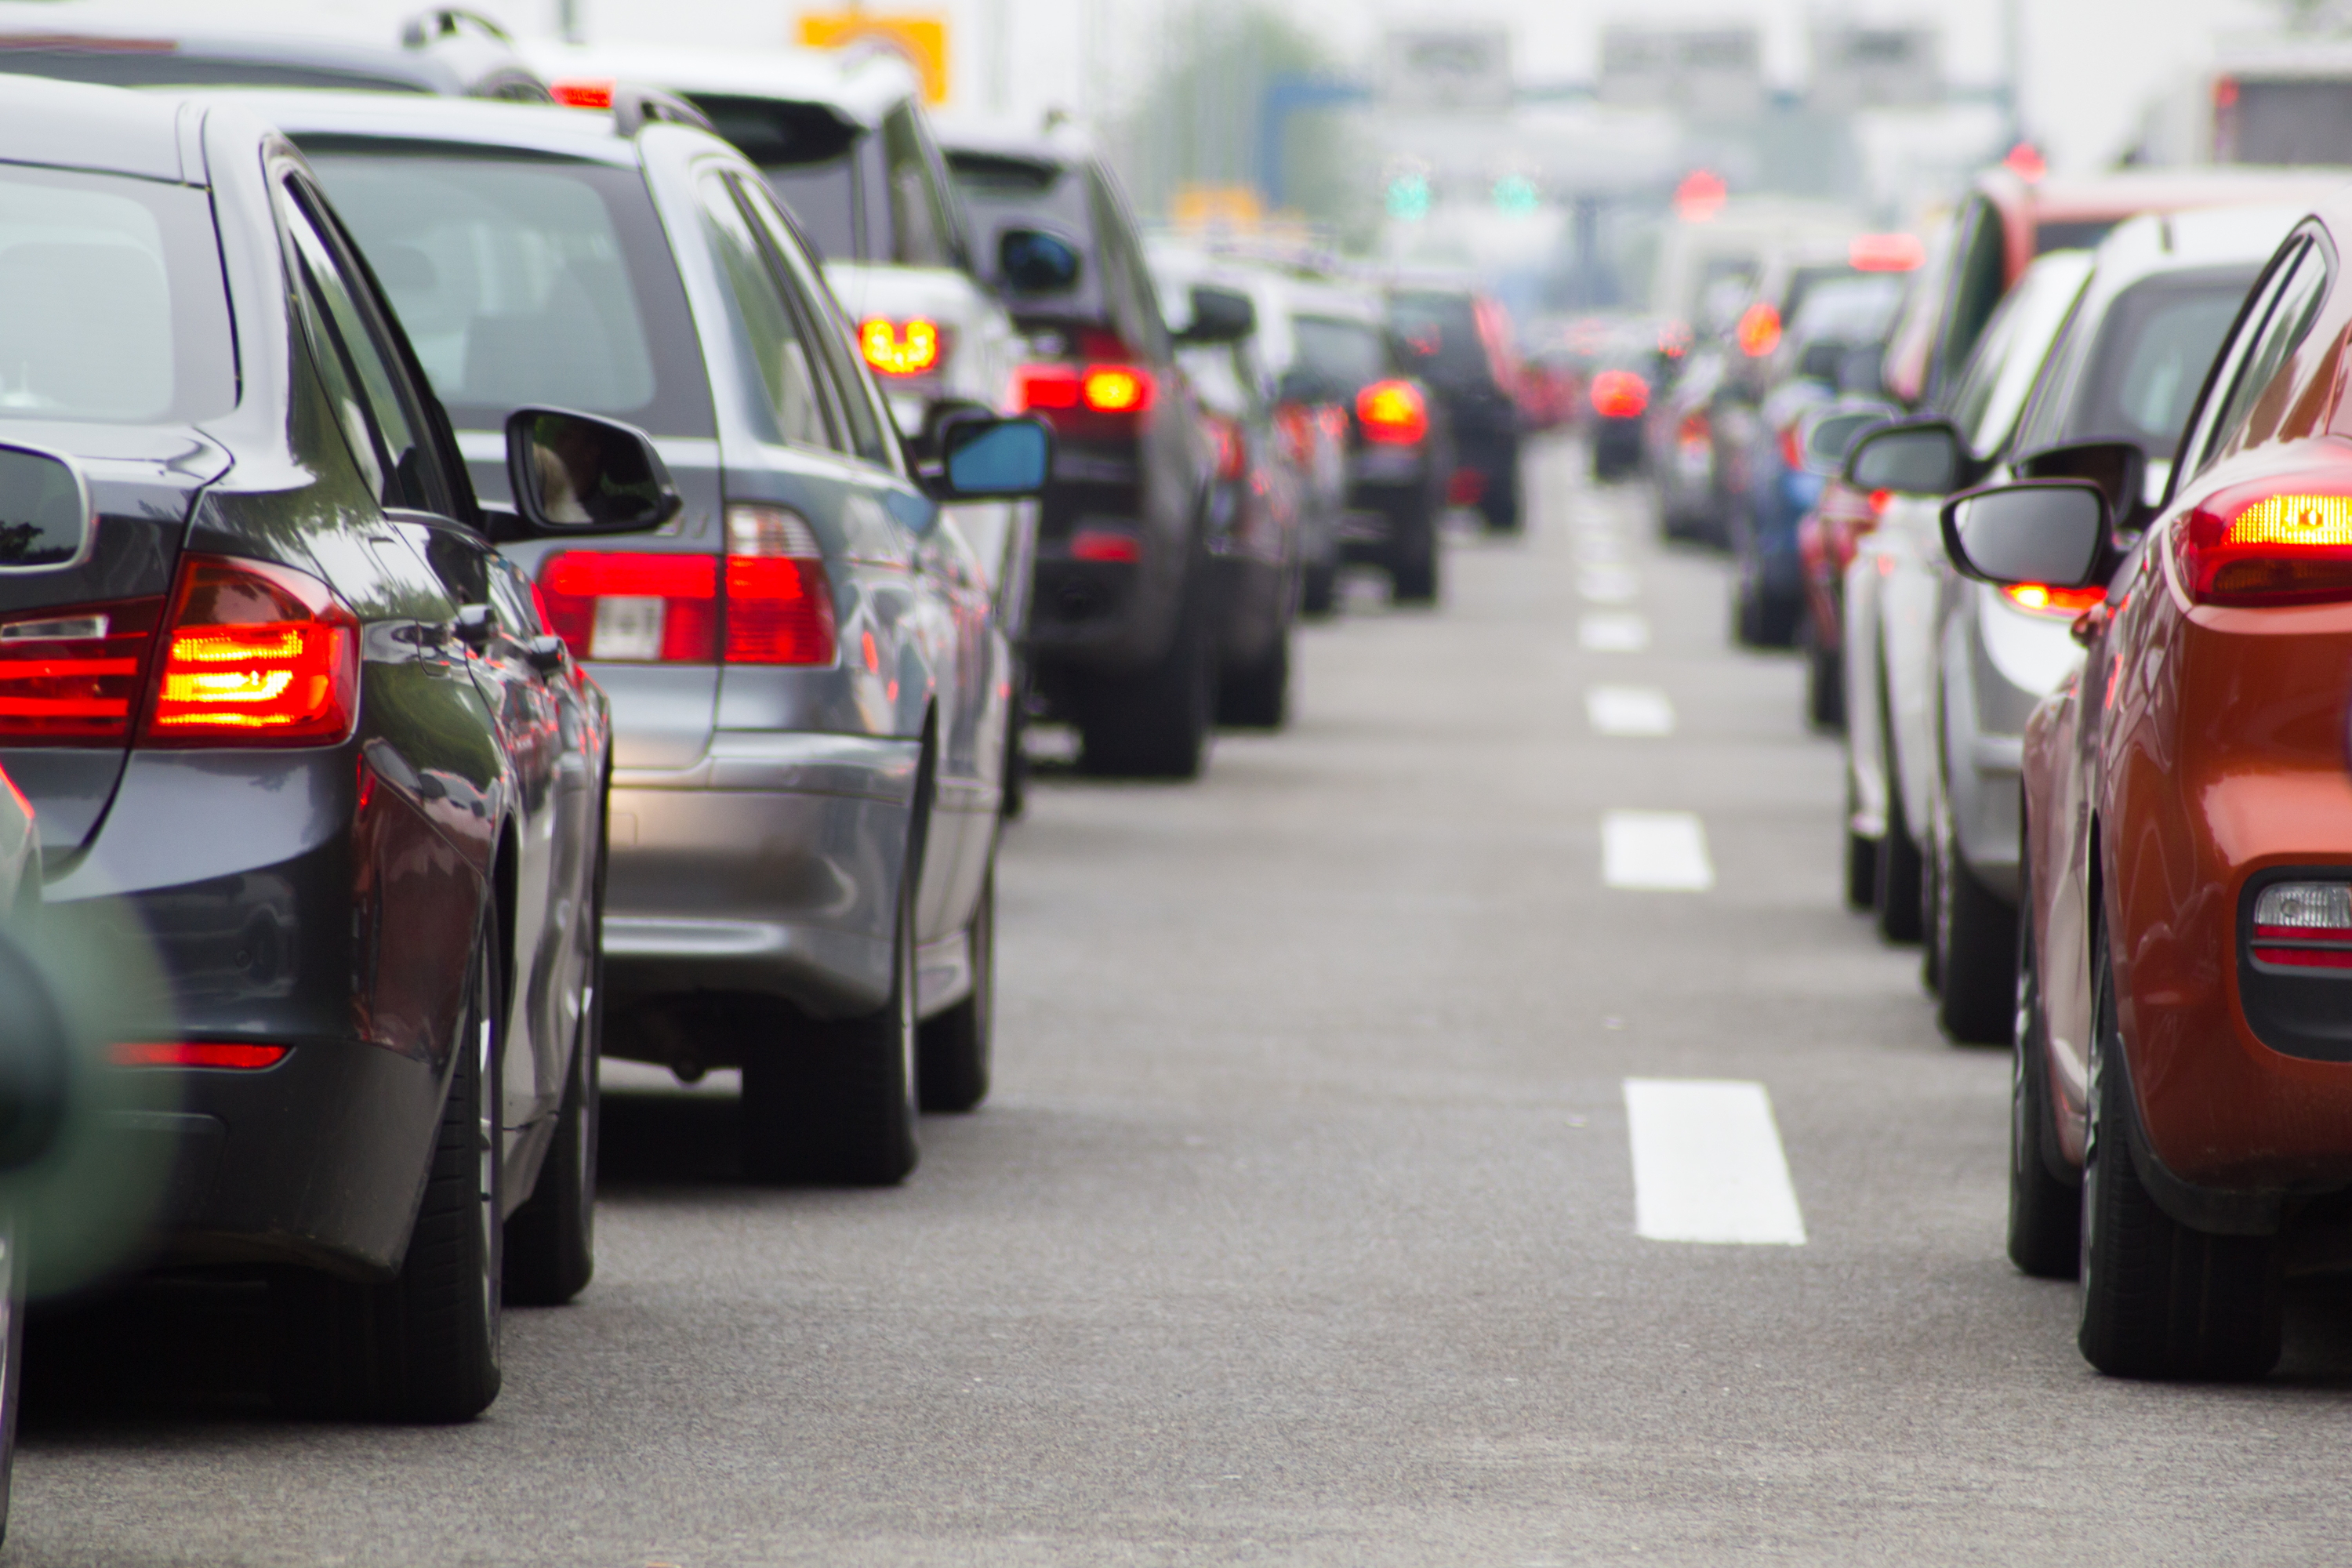 Bumper to bumper traffic can be avoided if you're proactive and learn different routes to take 